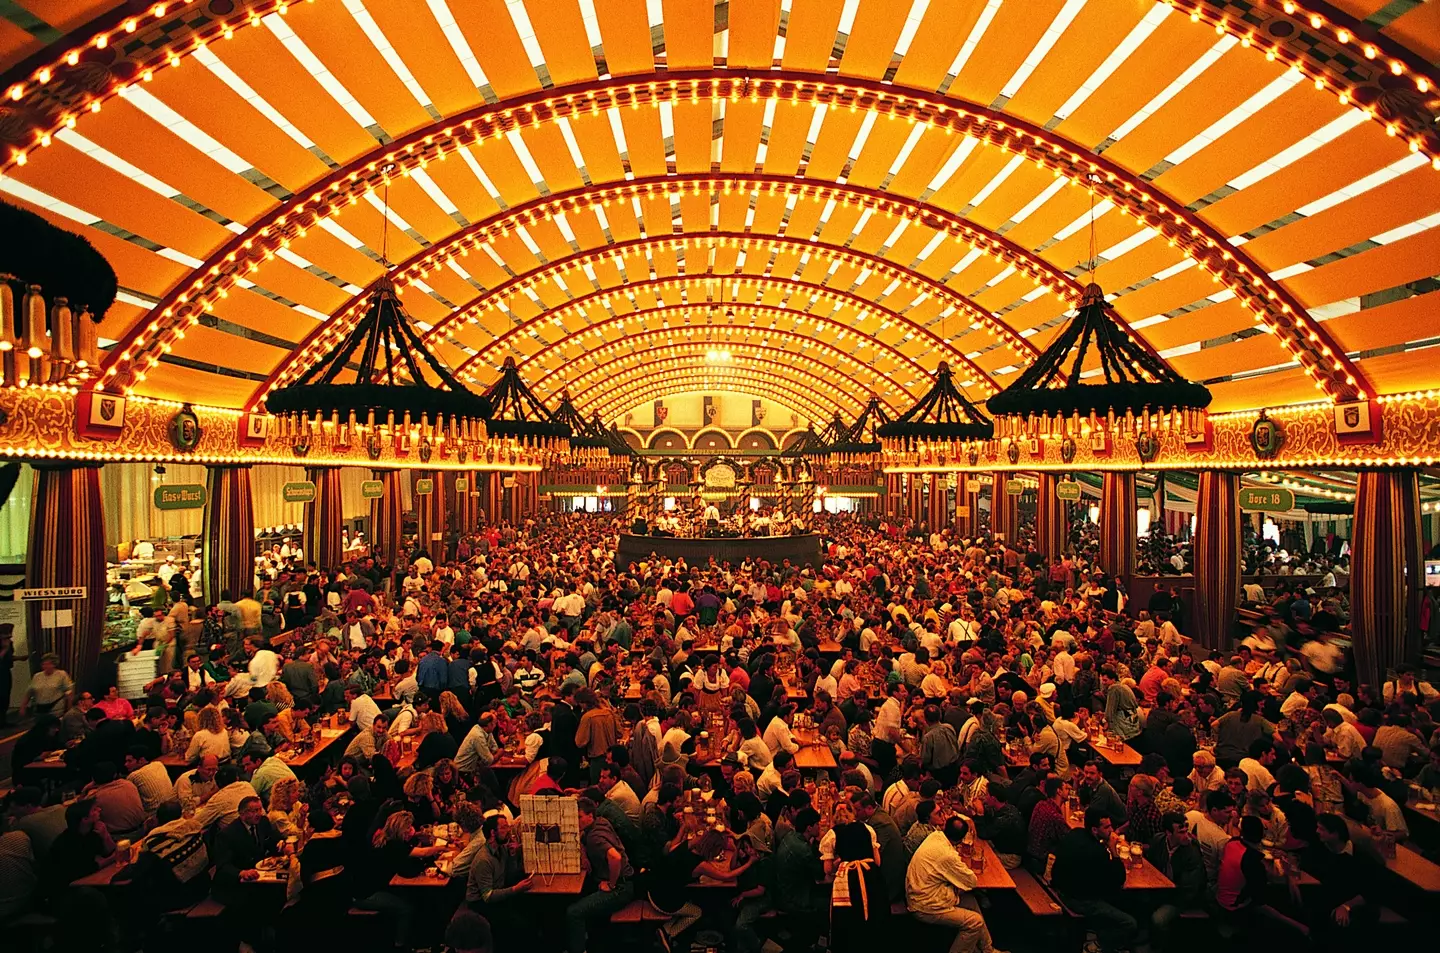 Millions of visitors flock to Munich for Oktoberfest each year.